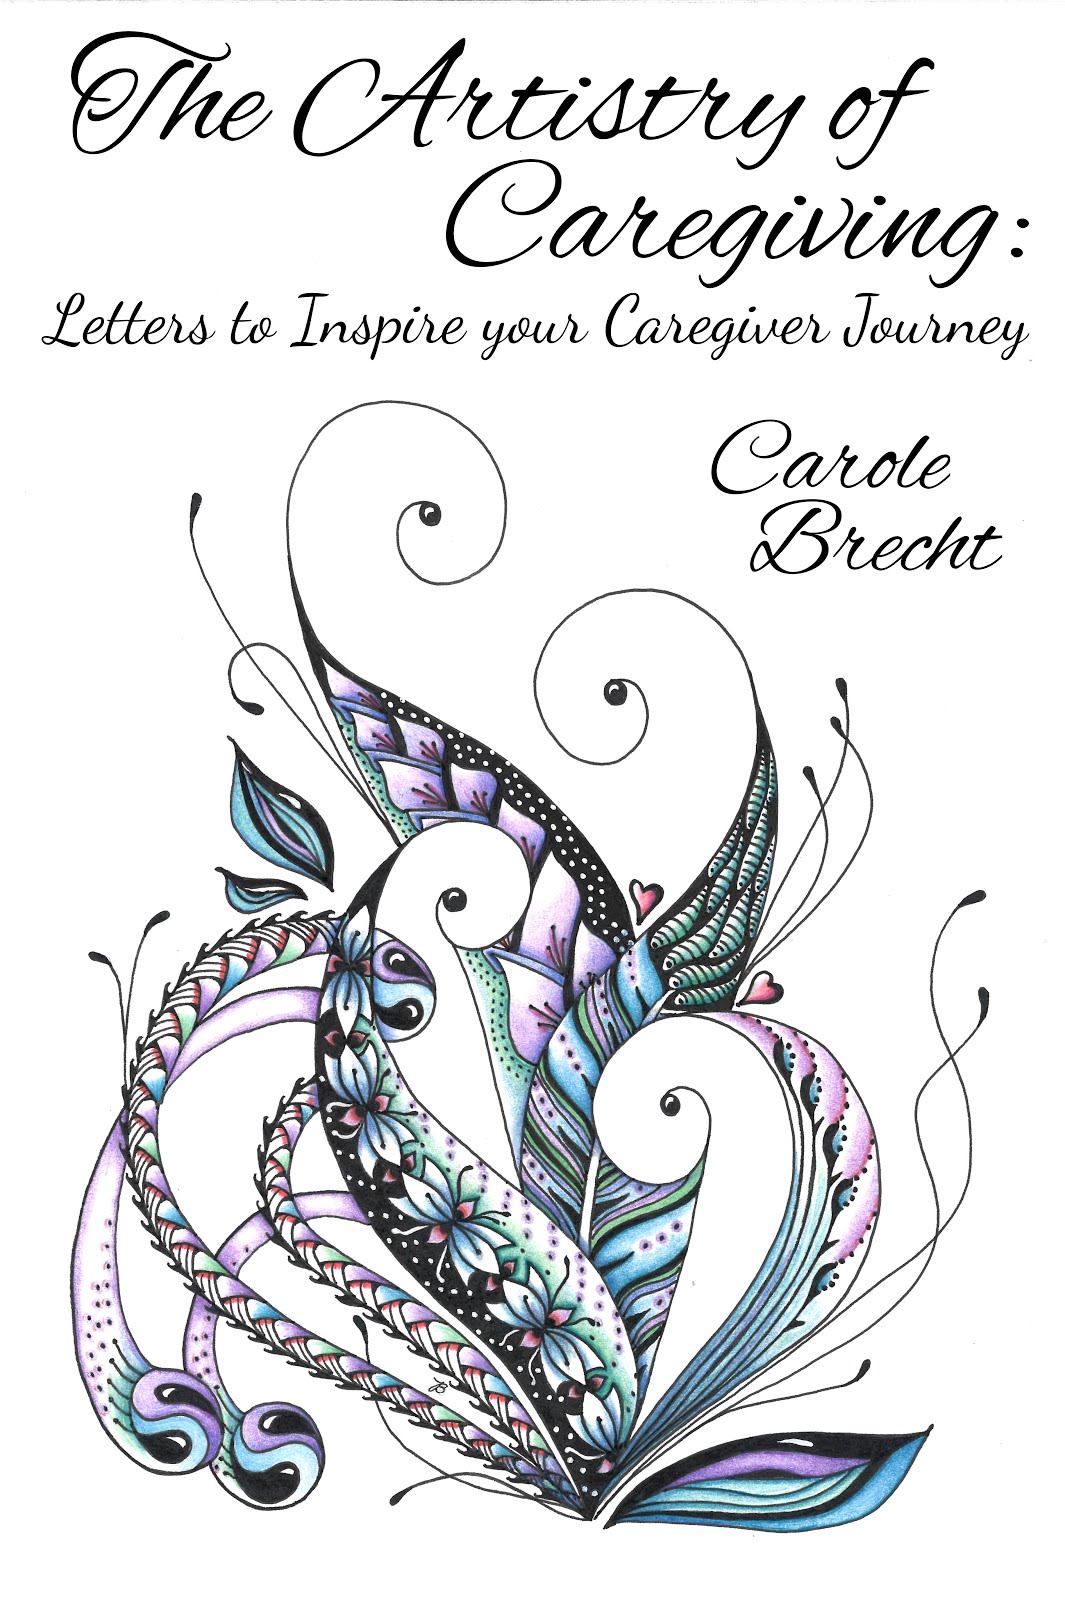 Check Out Carole's New Book!